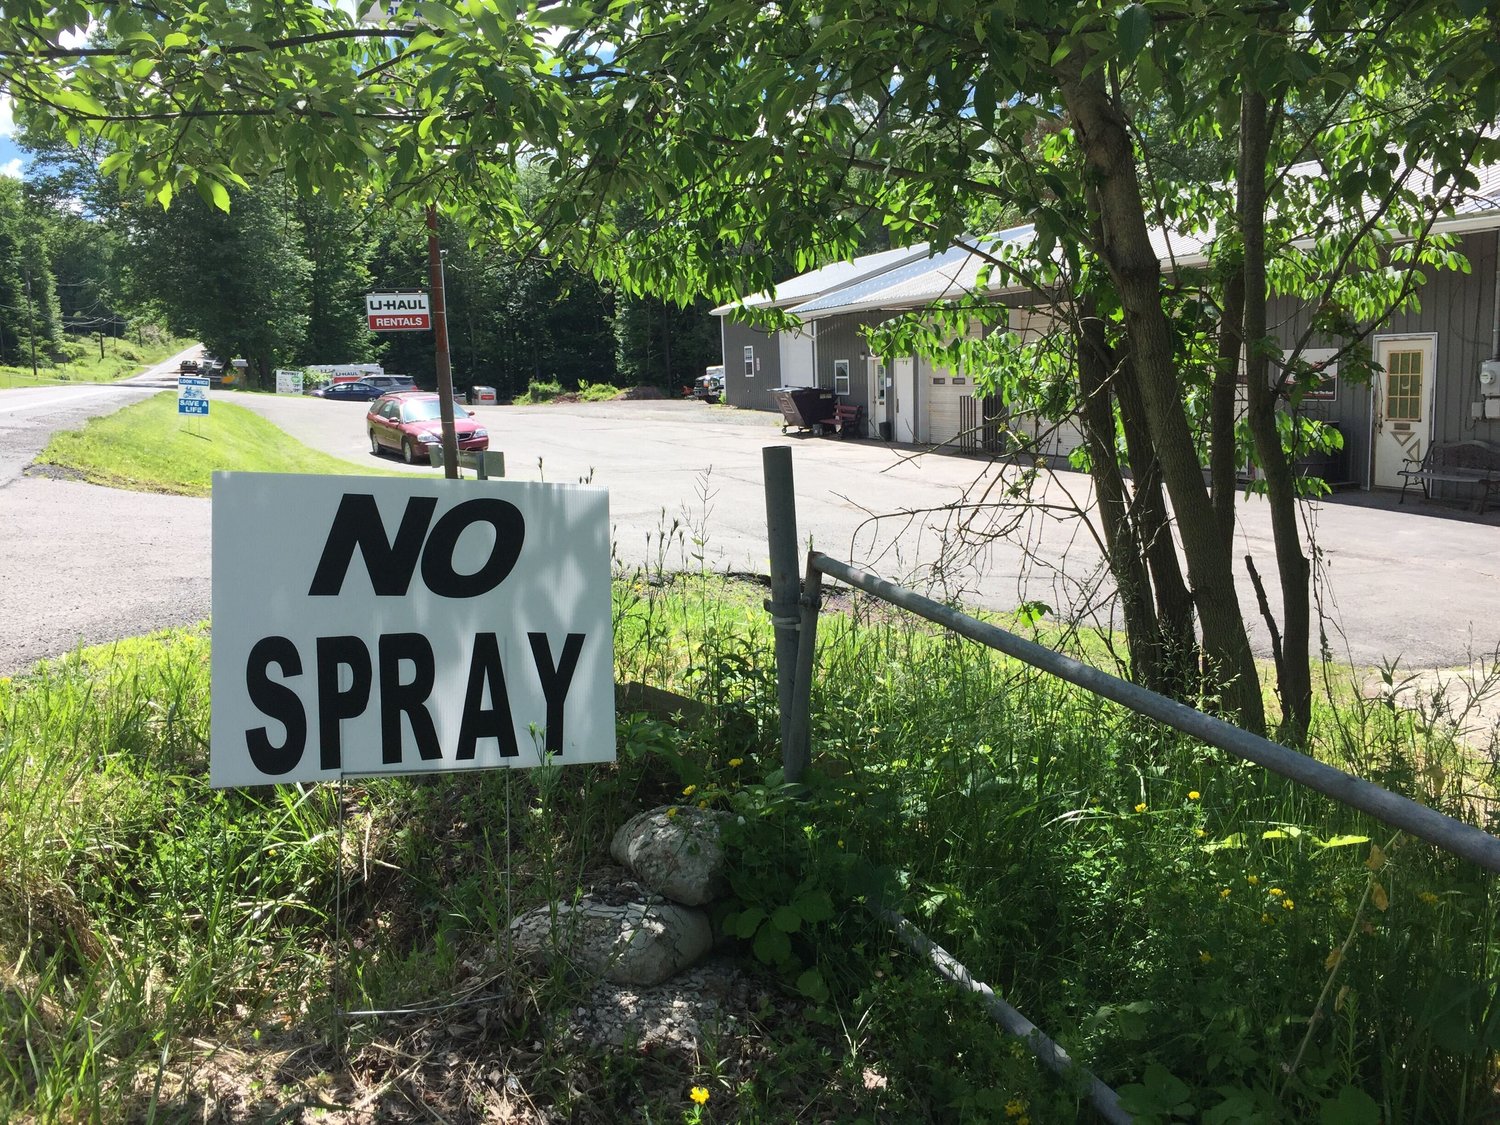 NO SPRAY signs have cropped up all along Route 652 through Berlin Township. This photo was taken heading west near Paparella’s Towing.